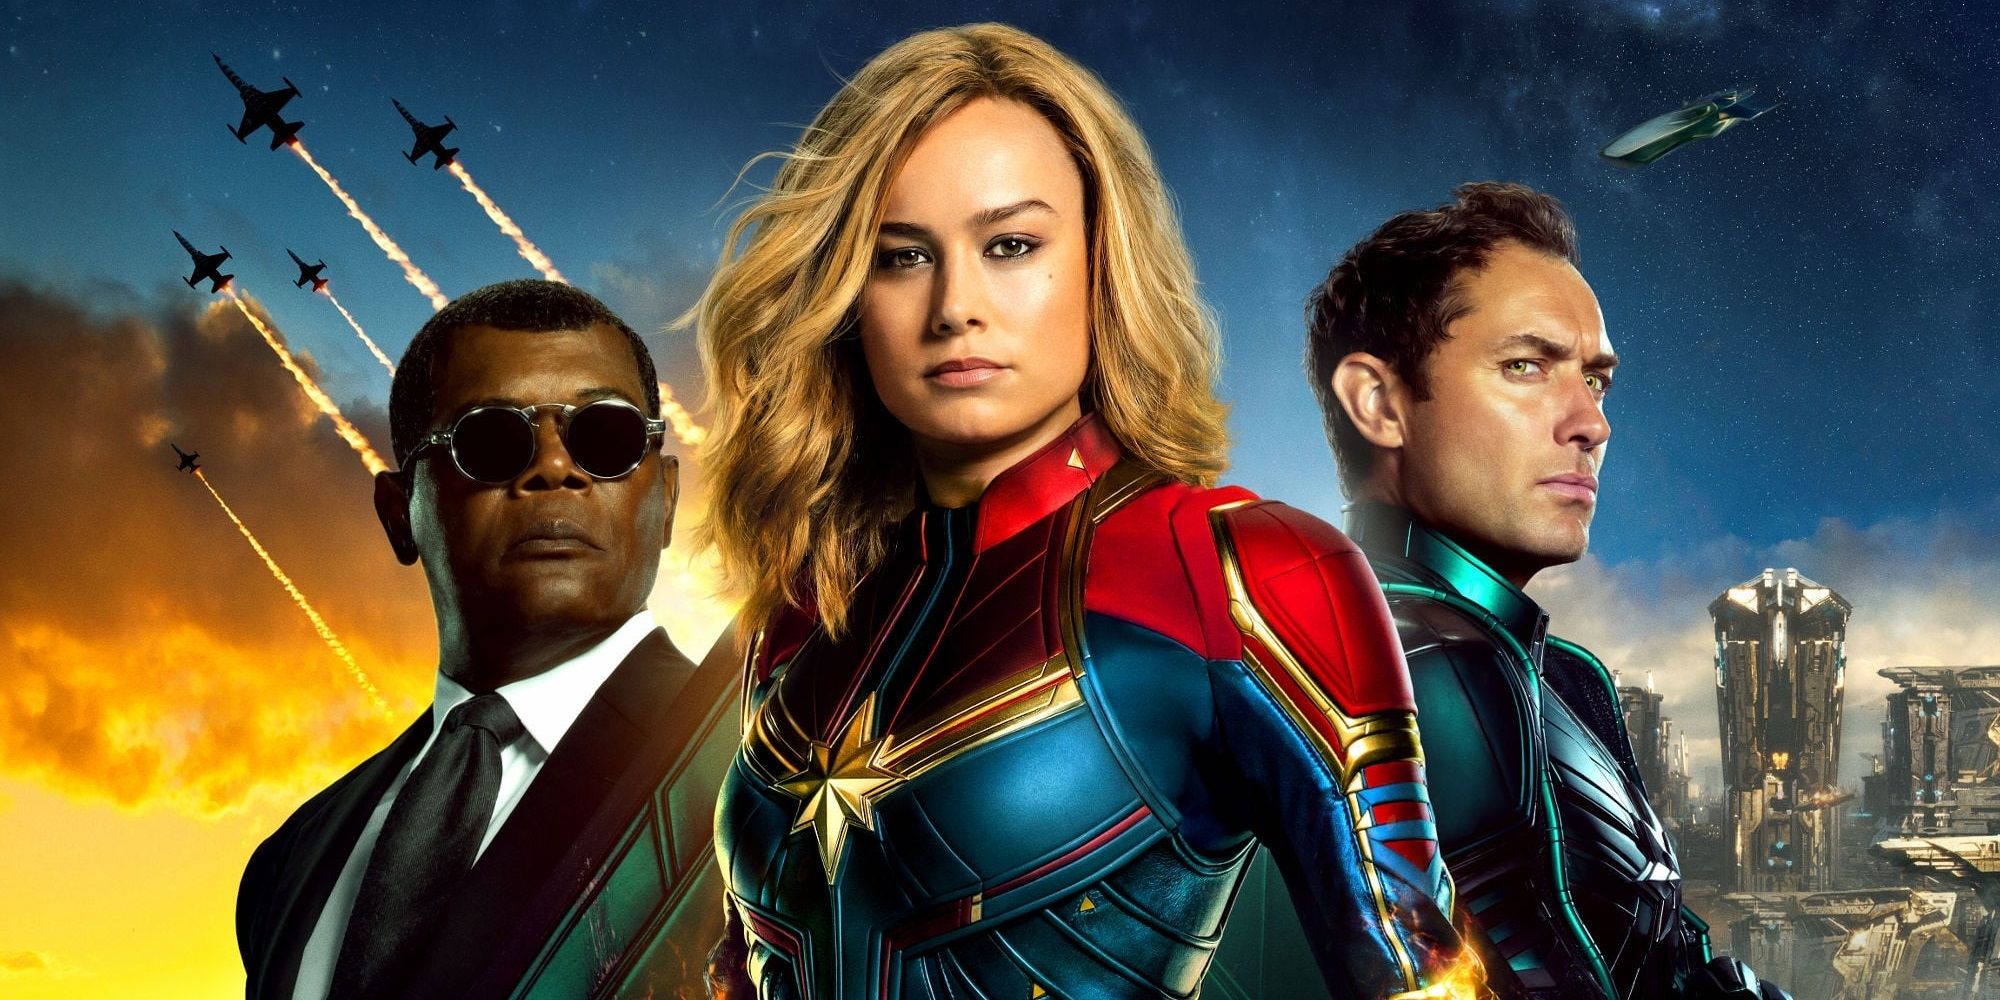 Captain Marvel' to be First Female Lead in Marvel Movie - ABC News